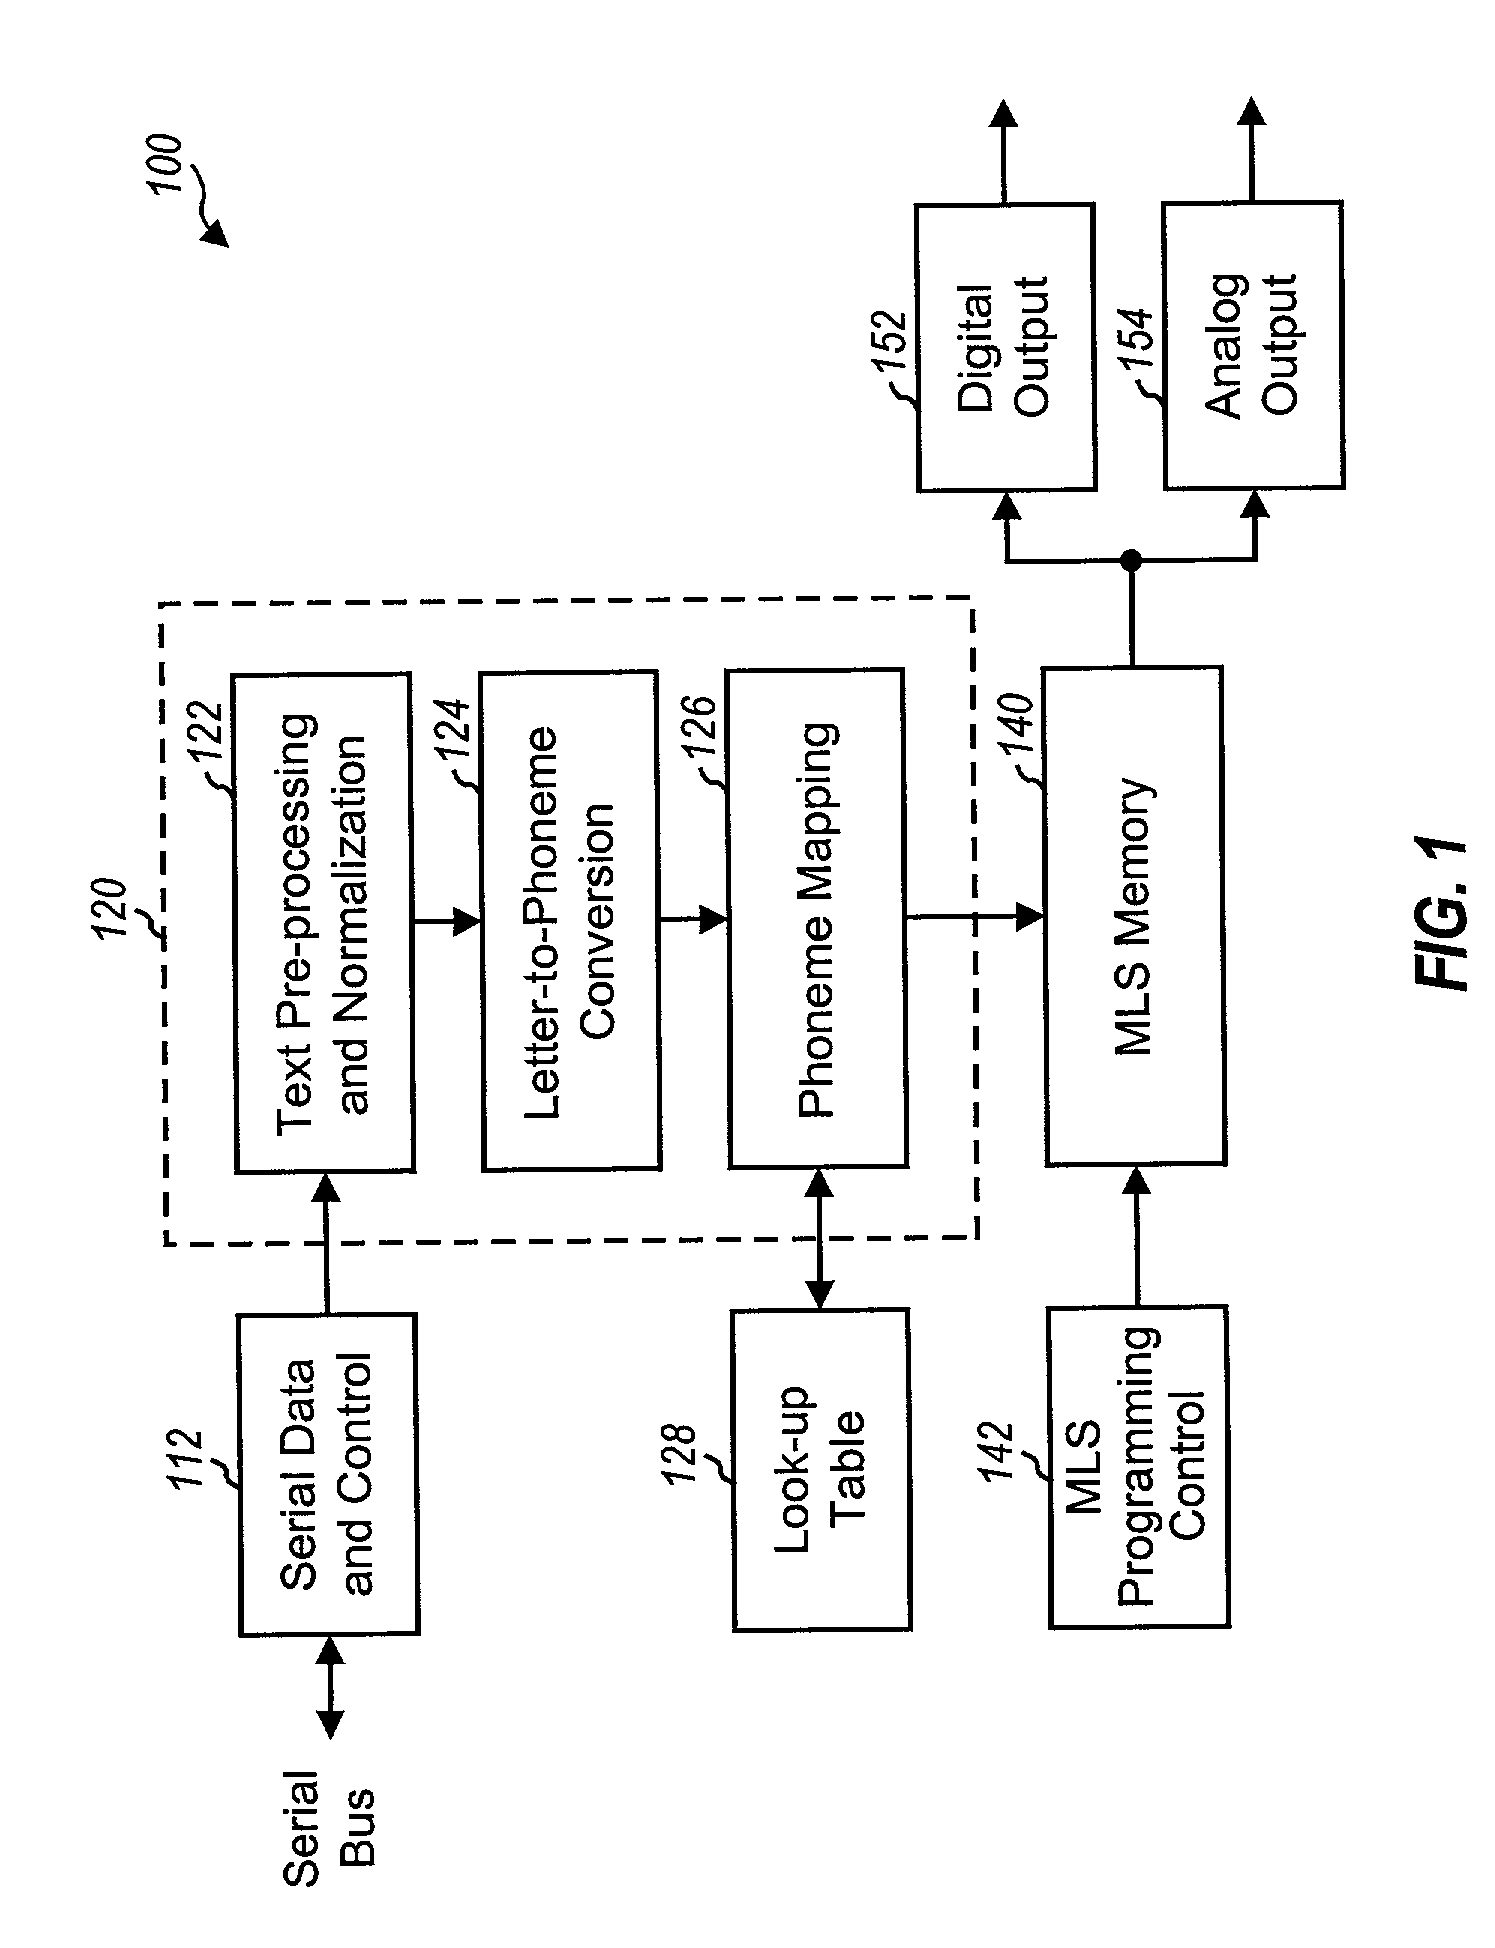 Text-to-speech conversion system on an integrated circuit